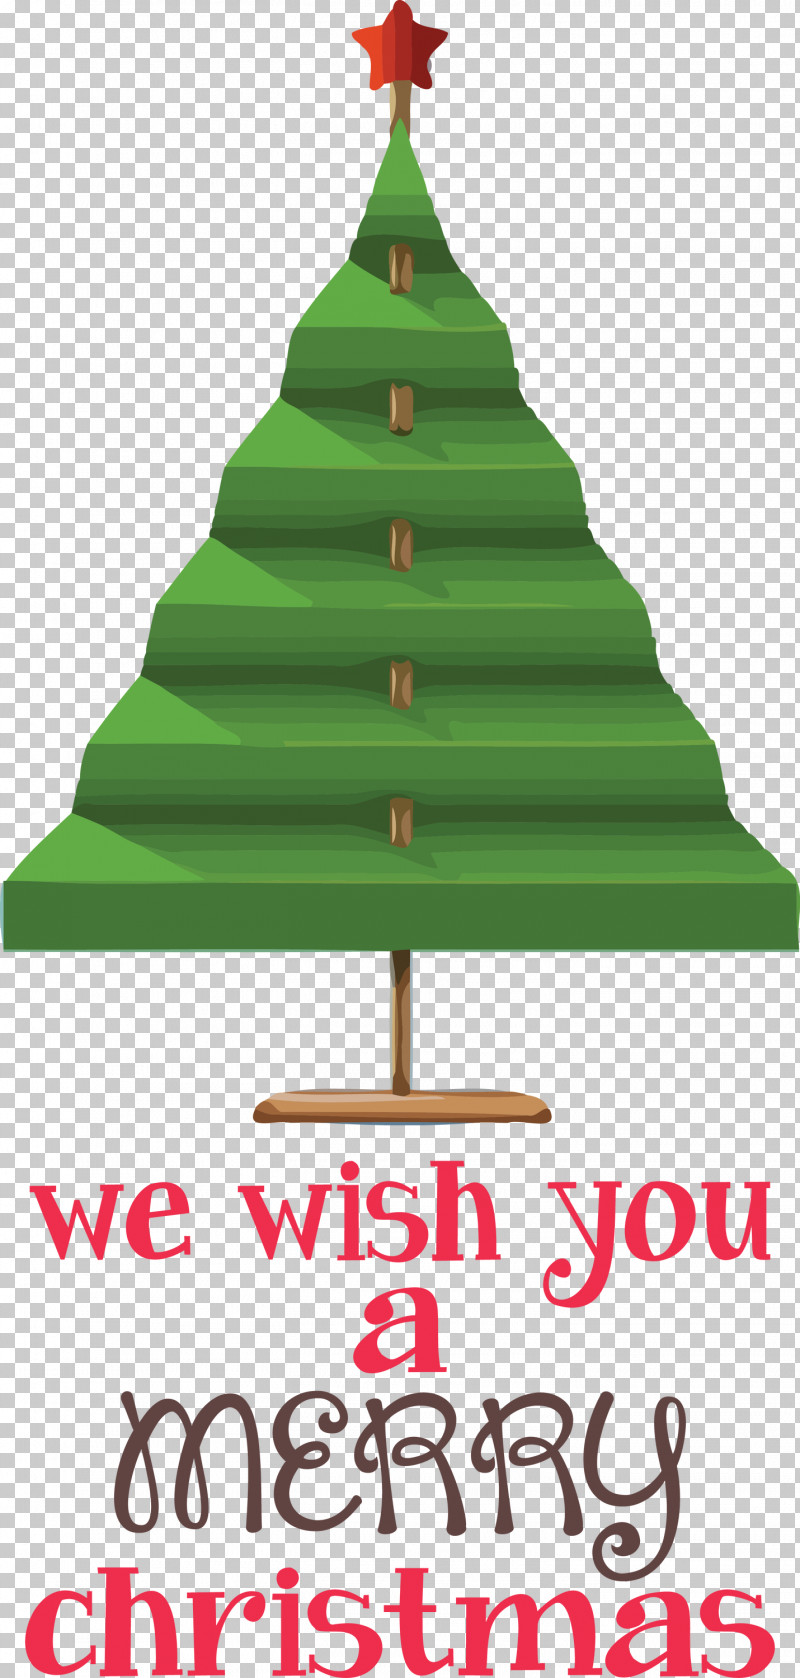 Merry Christmas Wish PNG, Clipart, Bauble, Christmas Day, Christmas Ornament M, Christmas Tree, Conifers Free PNG Download